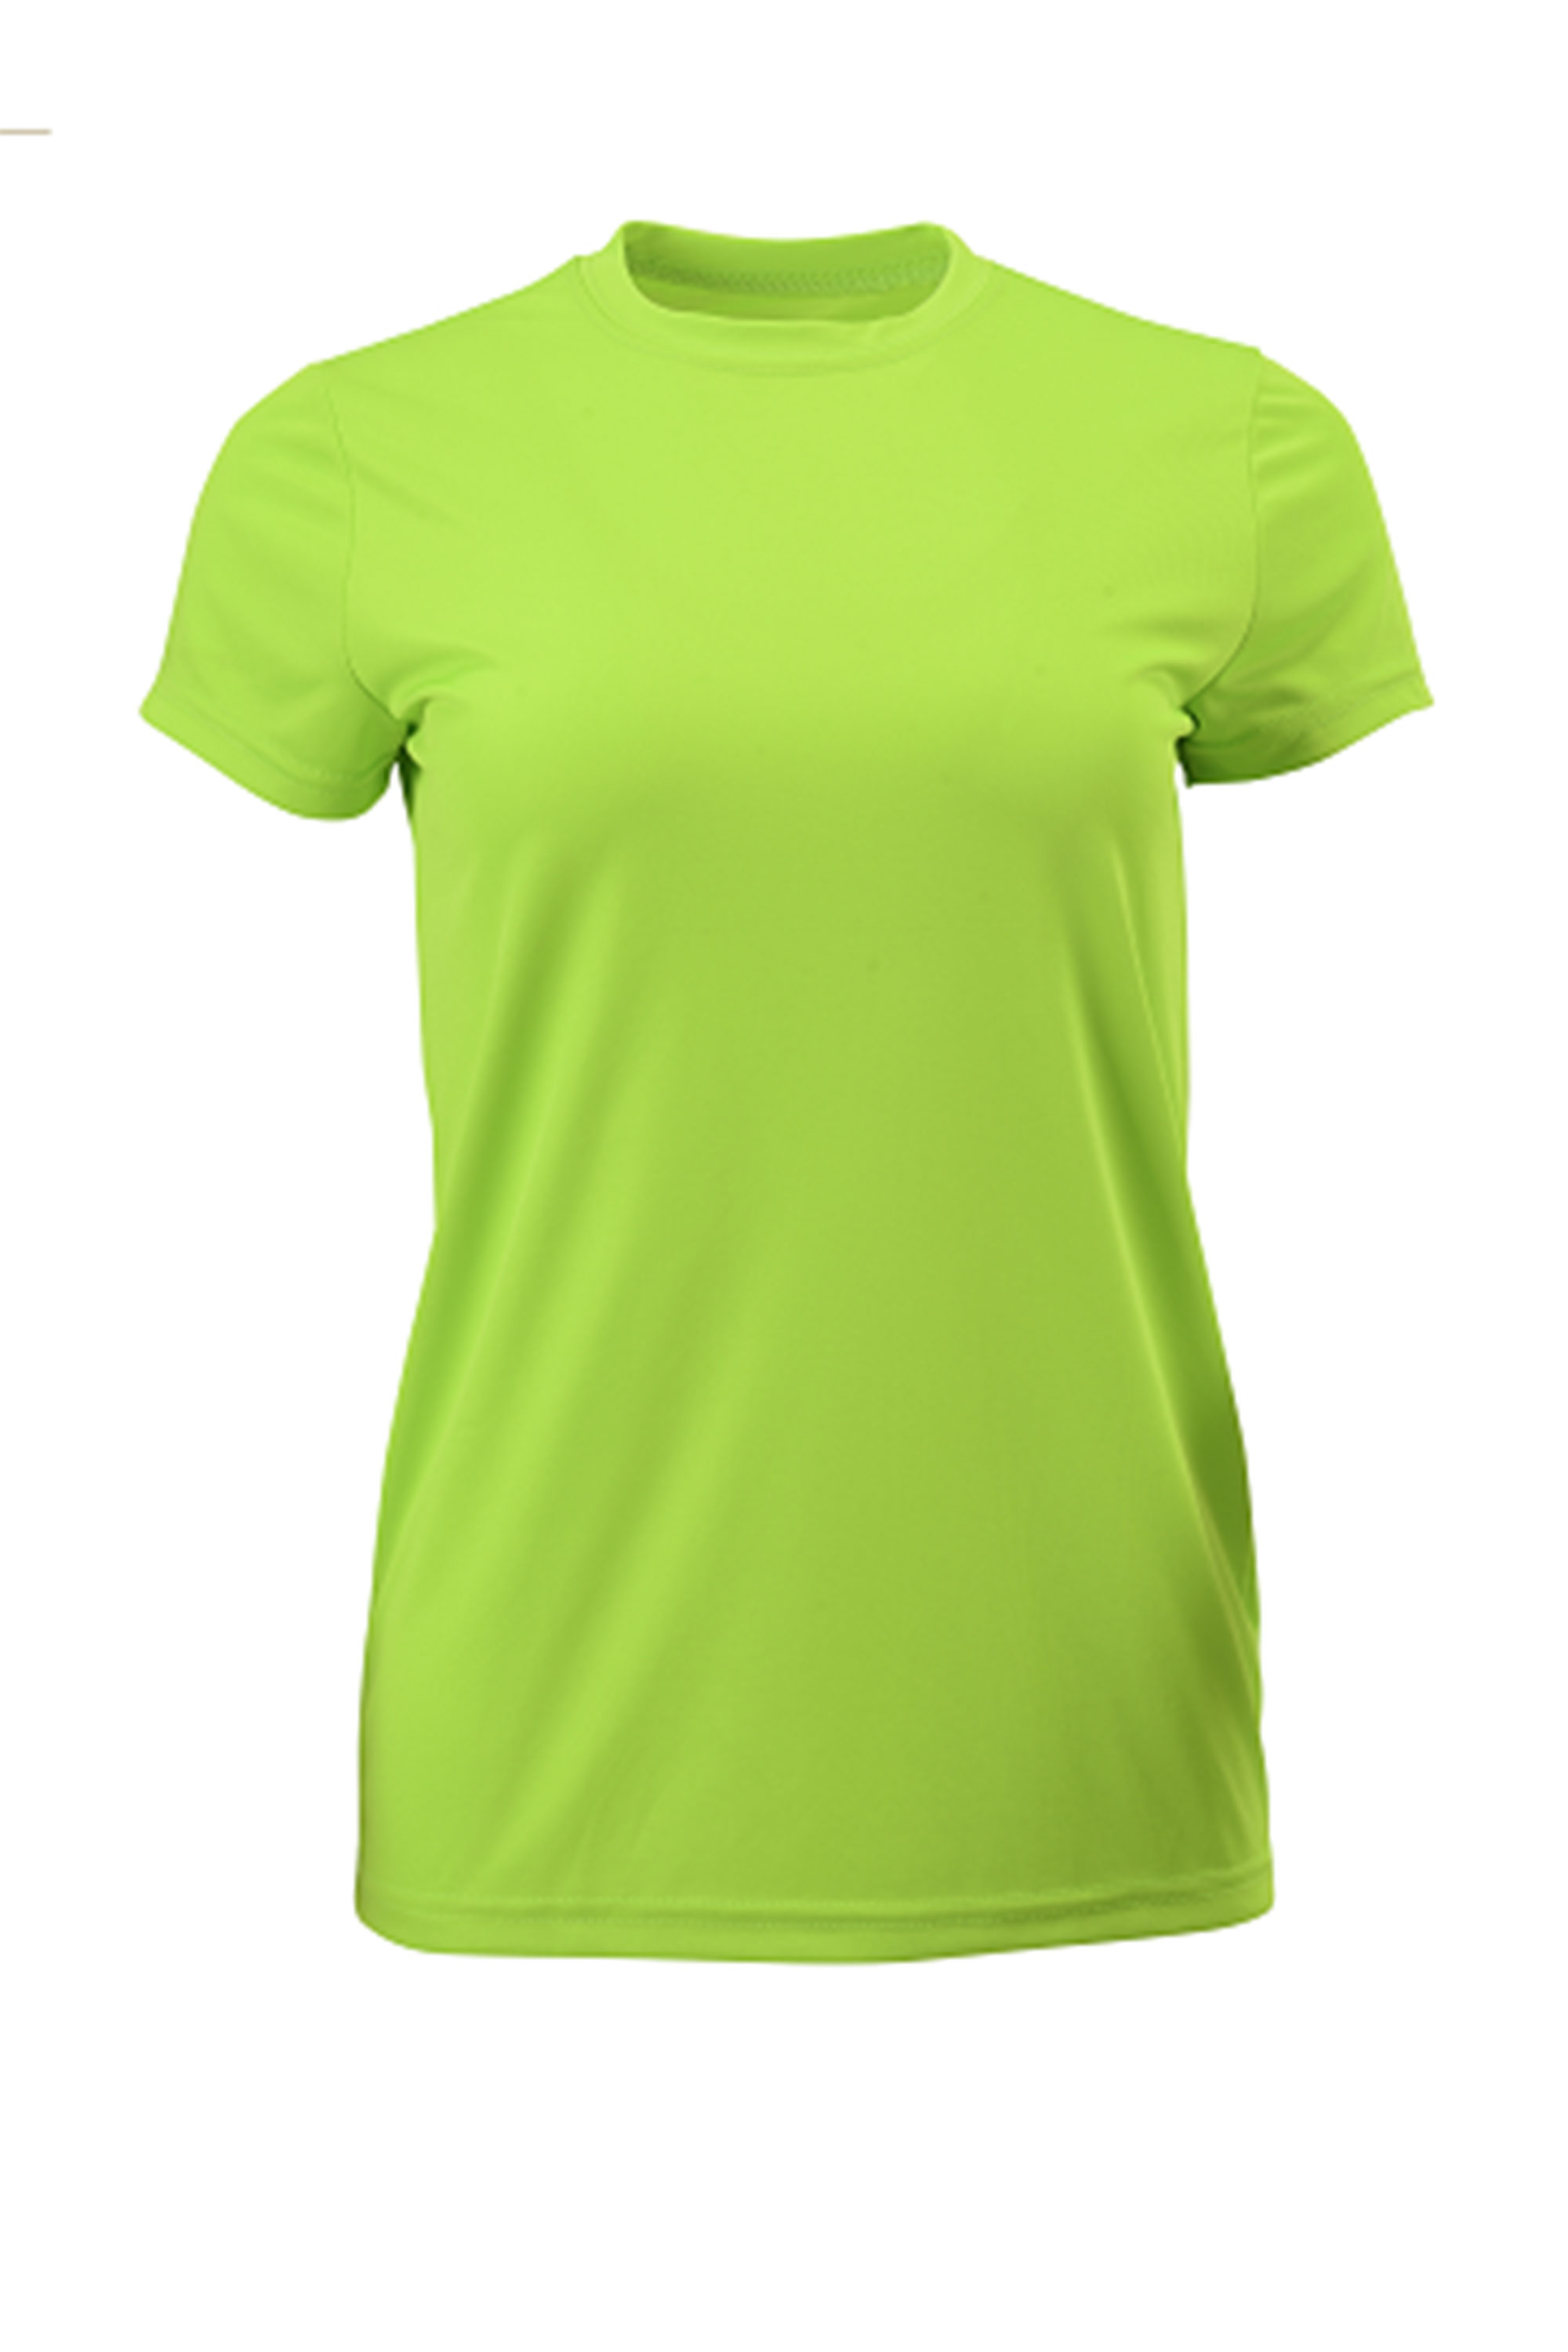 click to view Neon Lime